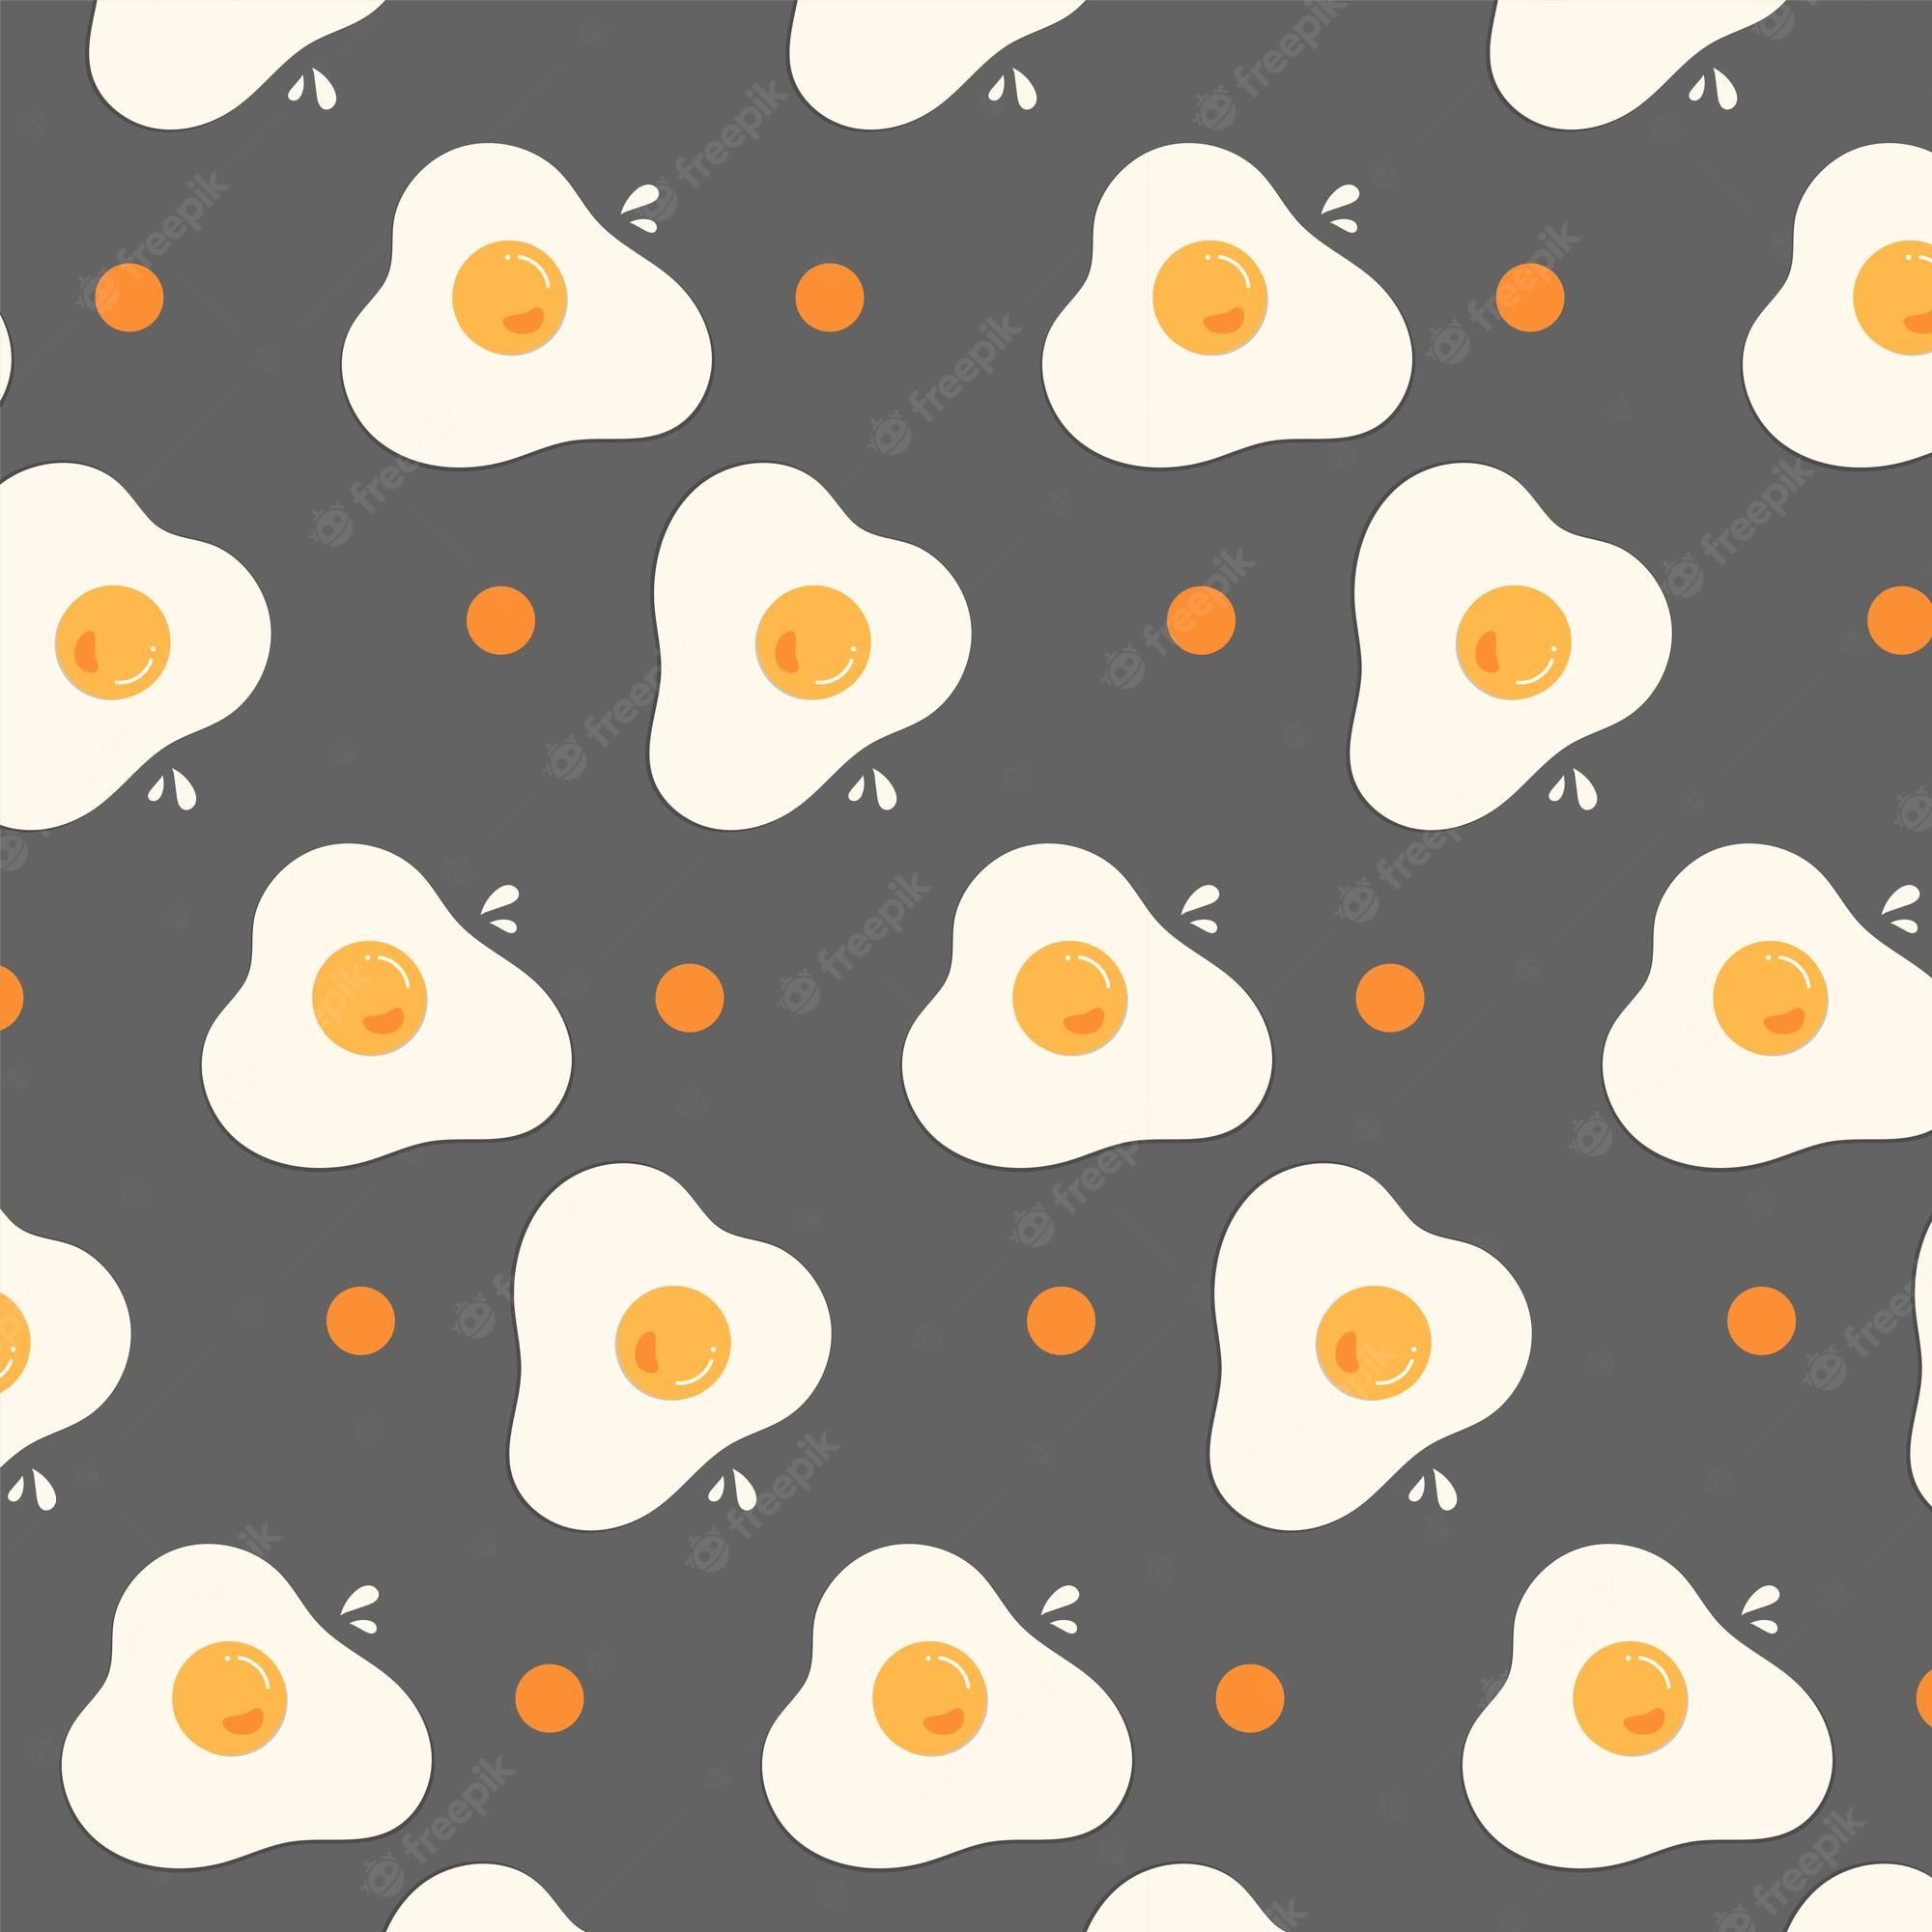 Seamless pattern with eggs on a gray background - Egg